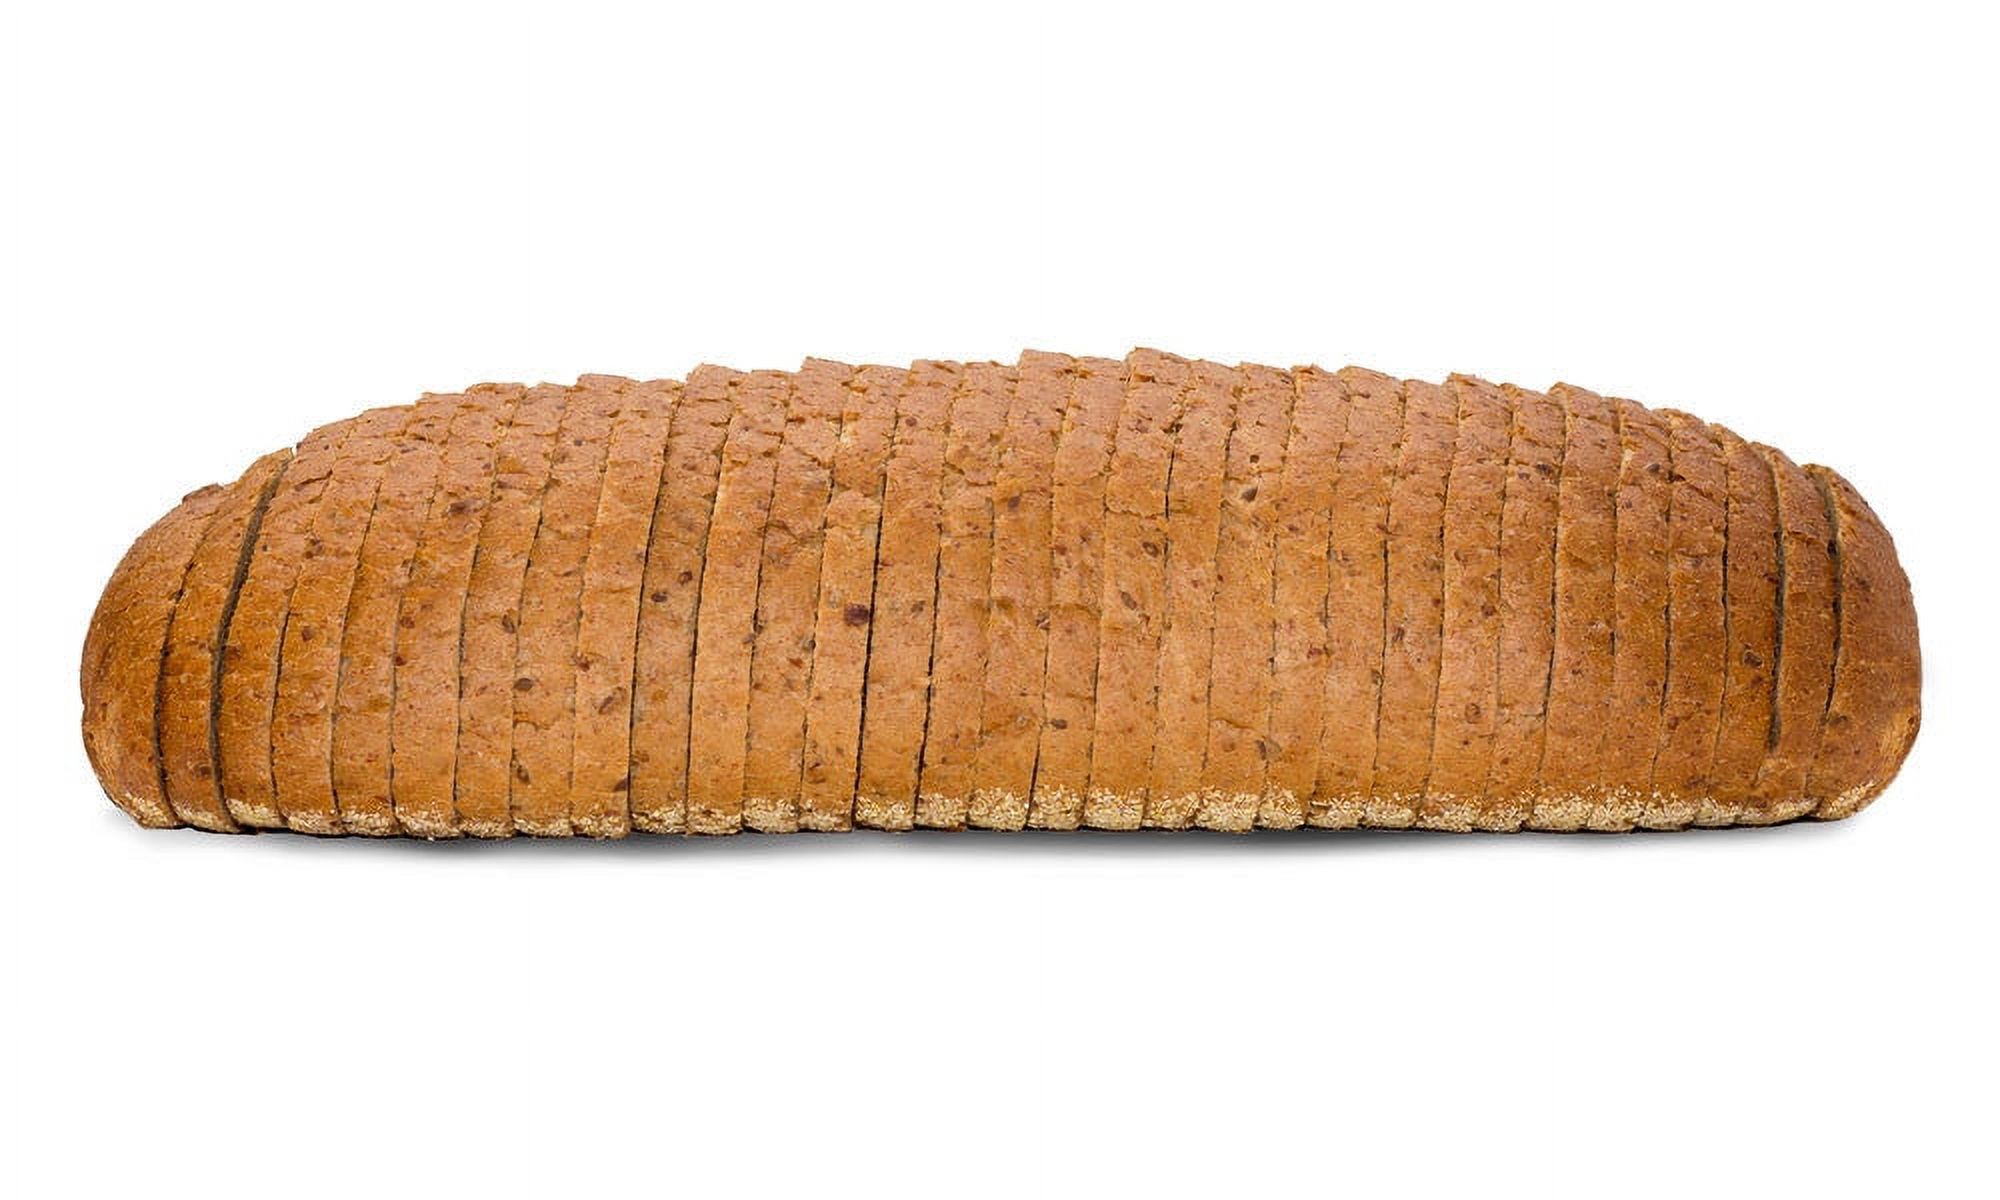 Natural Bakery Multigrain Rye Bread, 900g/31.7 oz., Single Loaf, Sliced {Imported from Canada} - image 4 of 4